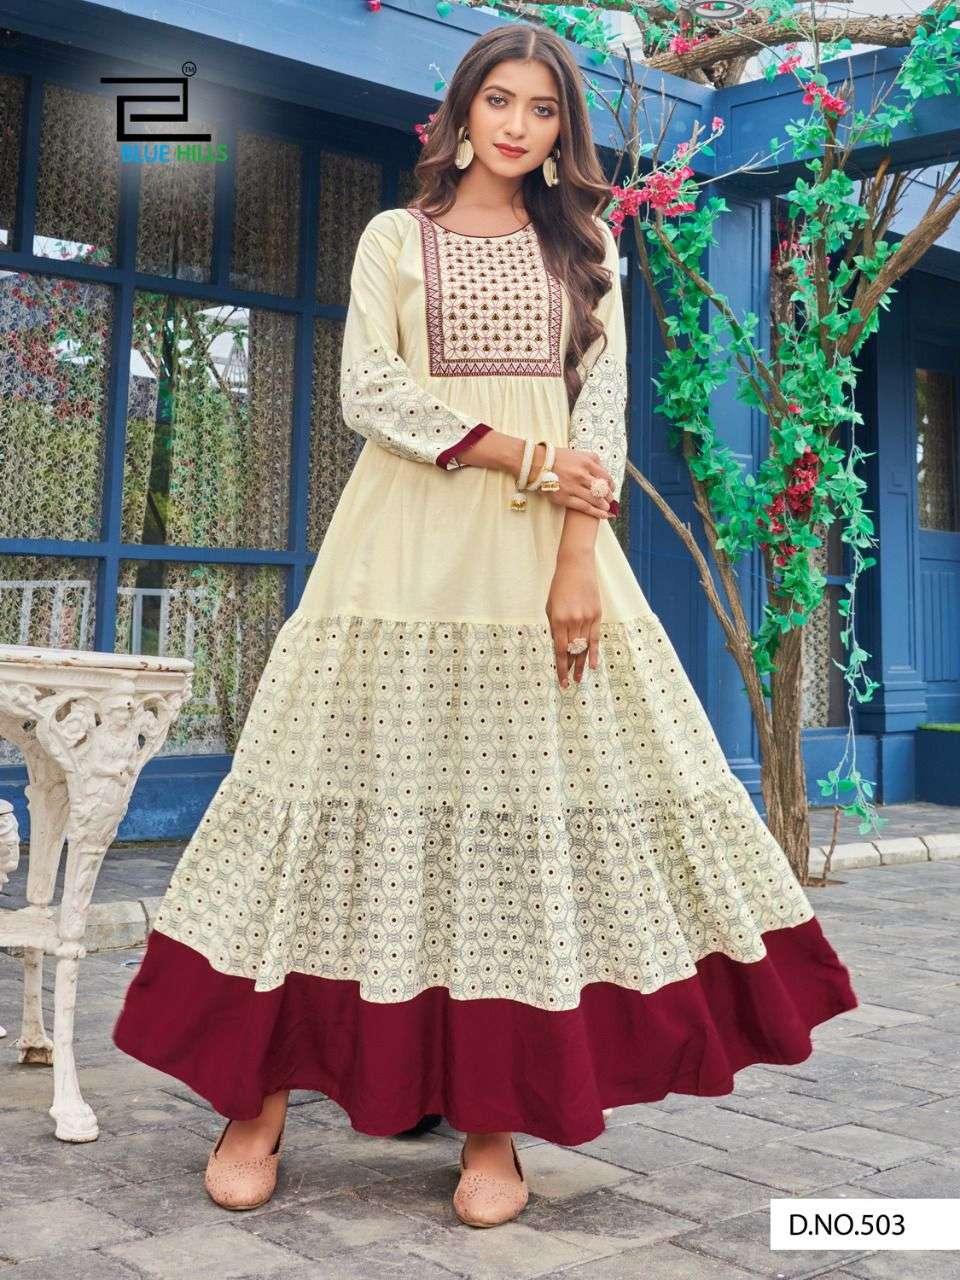 BLUE HILLS LIVIK VOL 5 DESIGNER COTTON CAMBRIC WITH NECK EMBROIDERY LONG FRILL GOWNS WHOLESALE